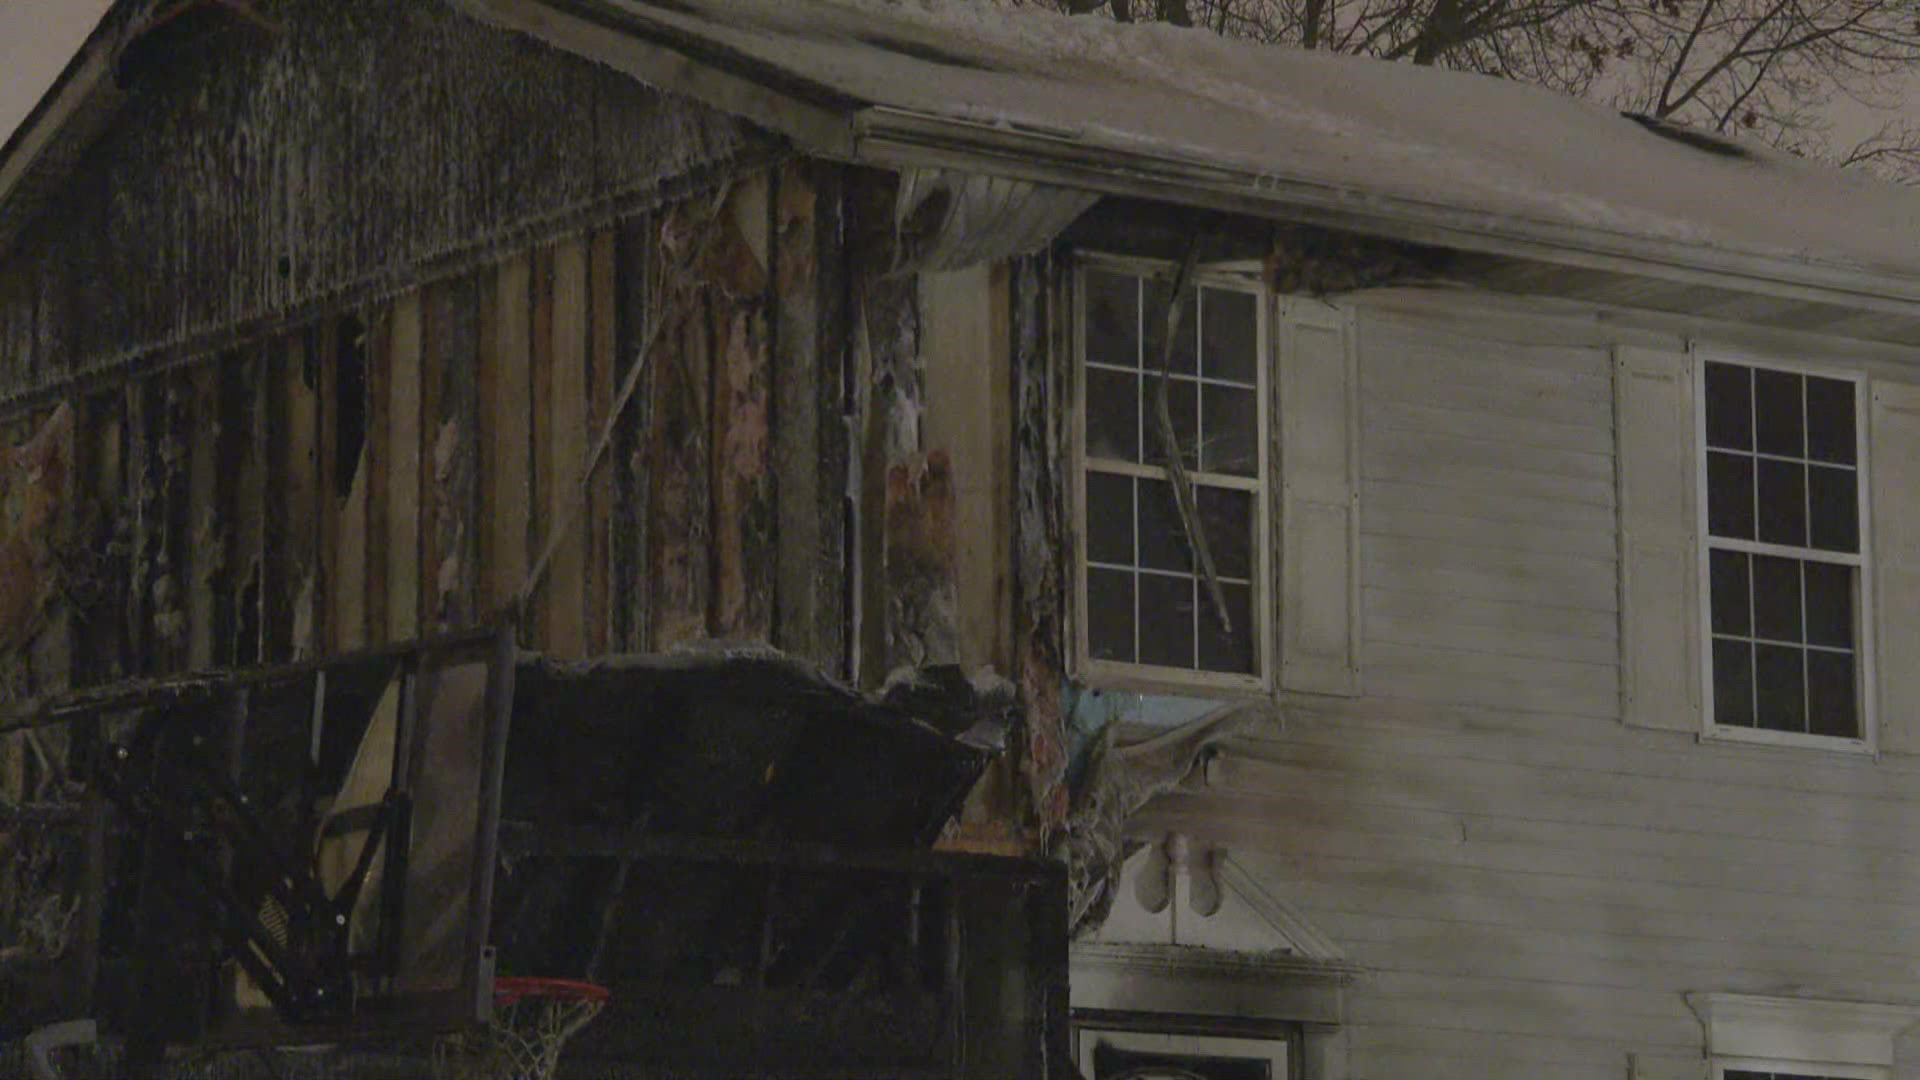 Fire officials say occupants were evaluated for smoke inhalation.